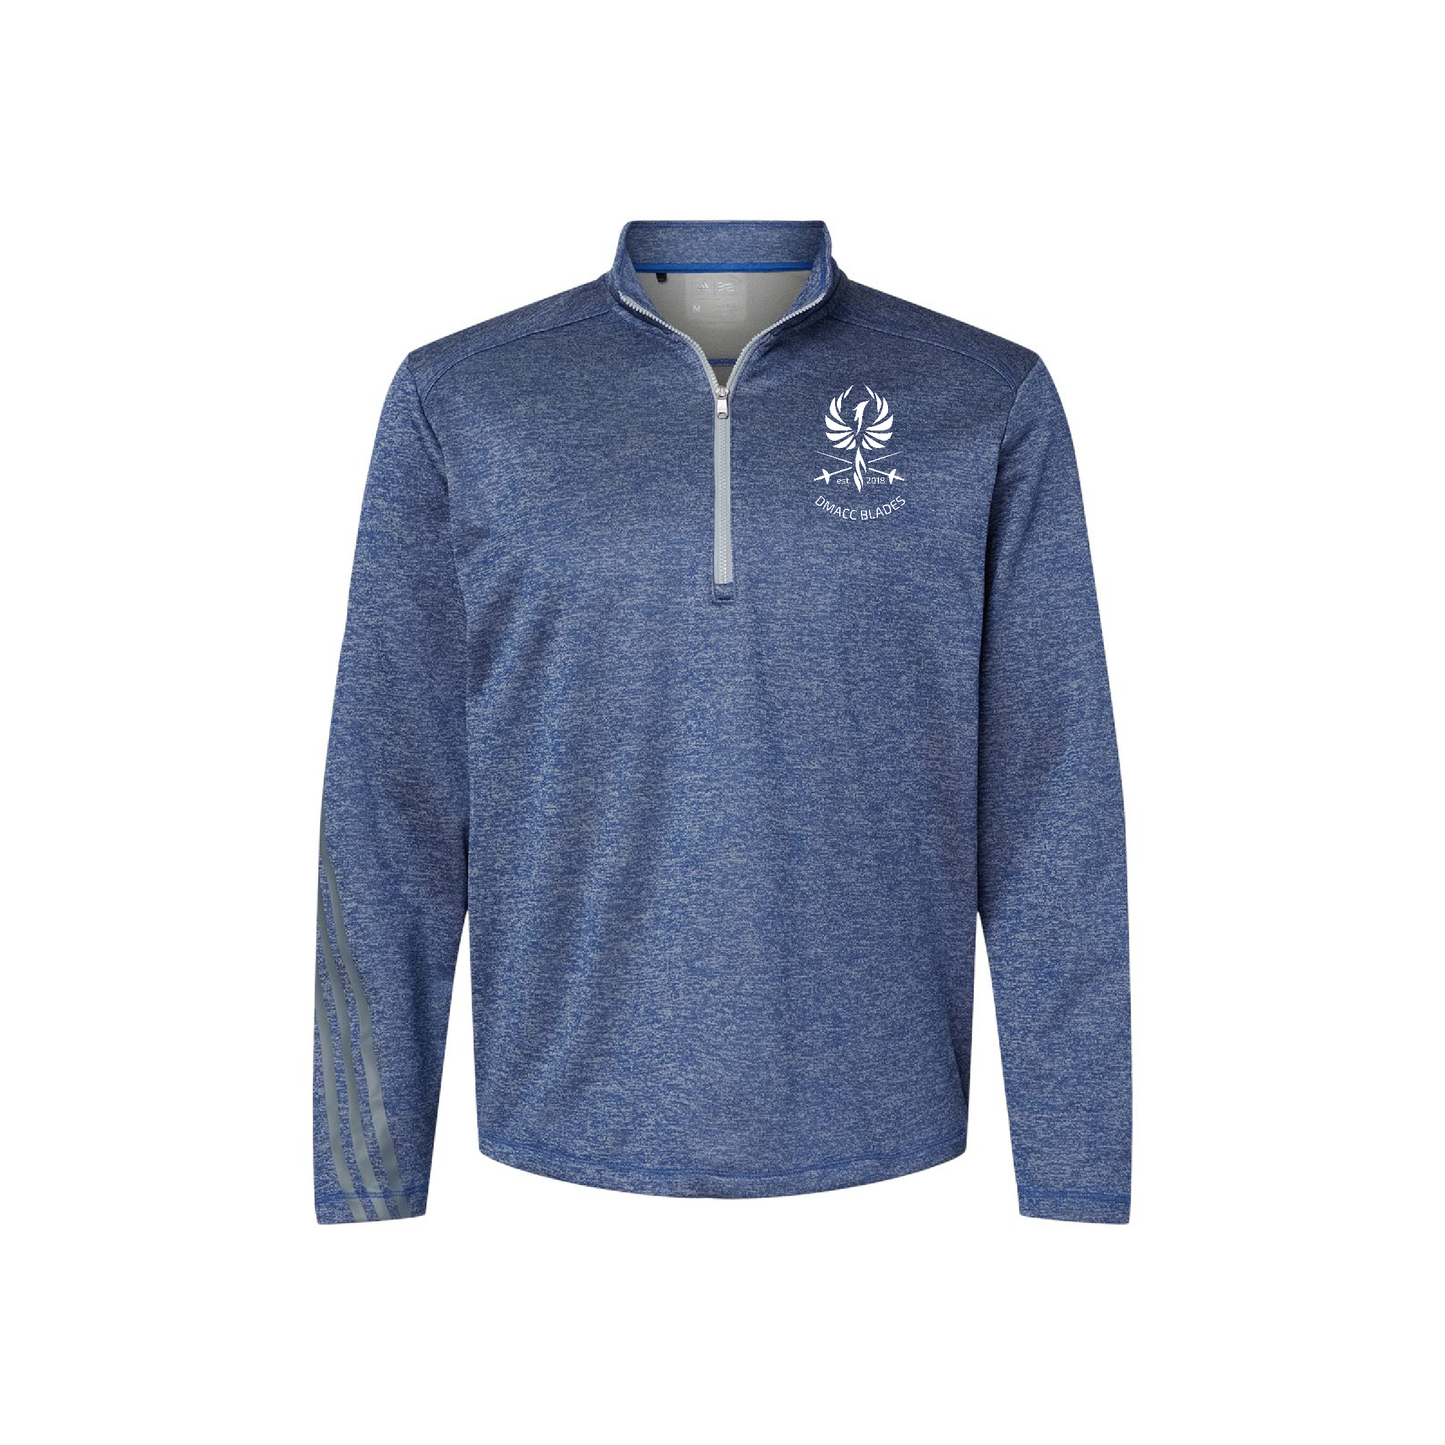 DMACC Blades Adidas Brushed Terry Quarter-Zip Pullover